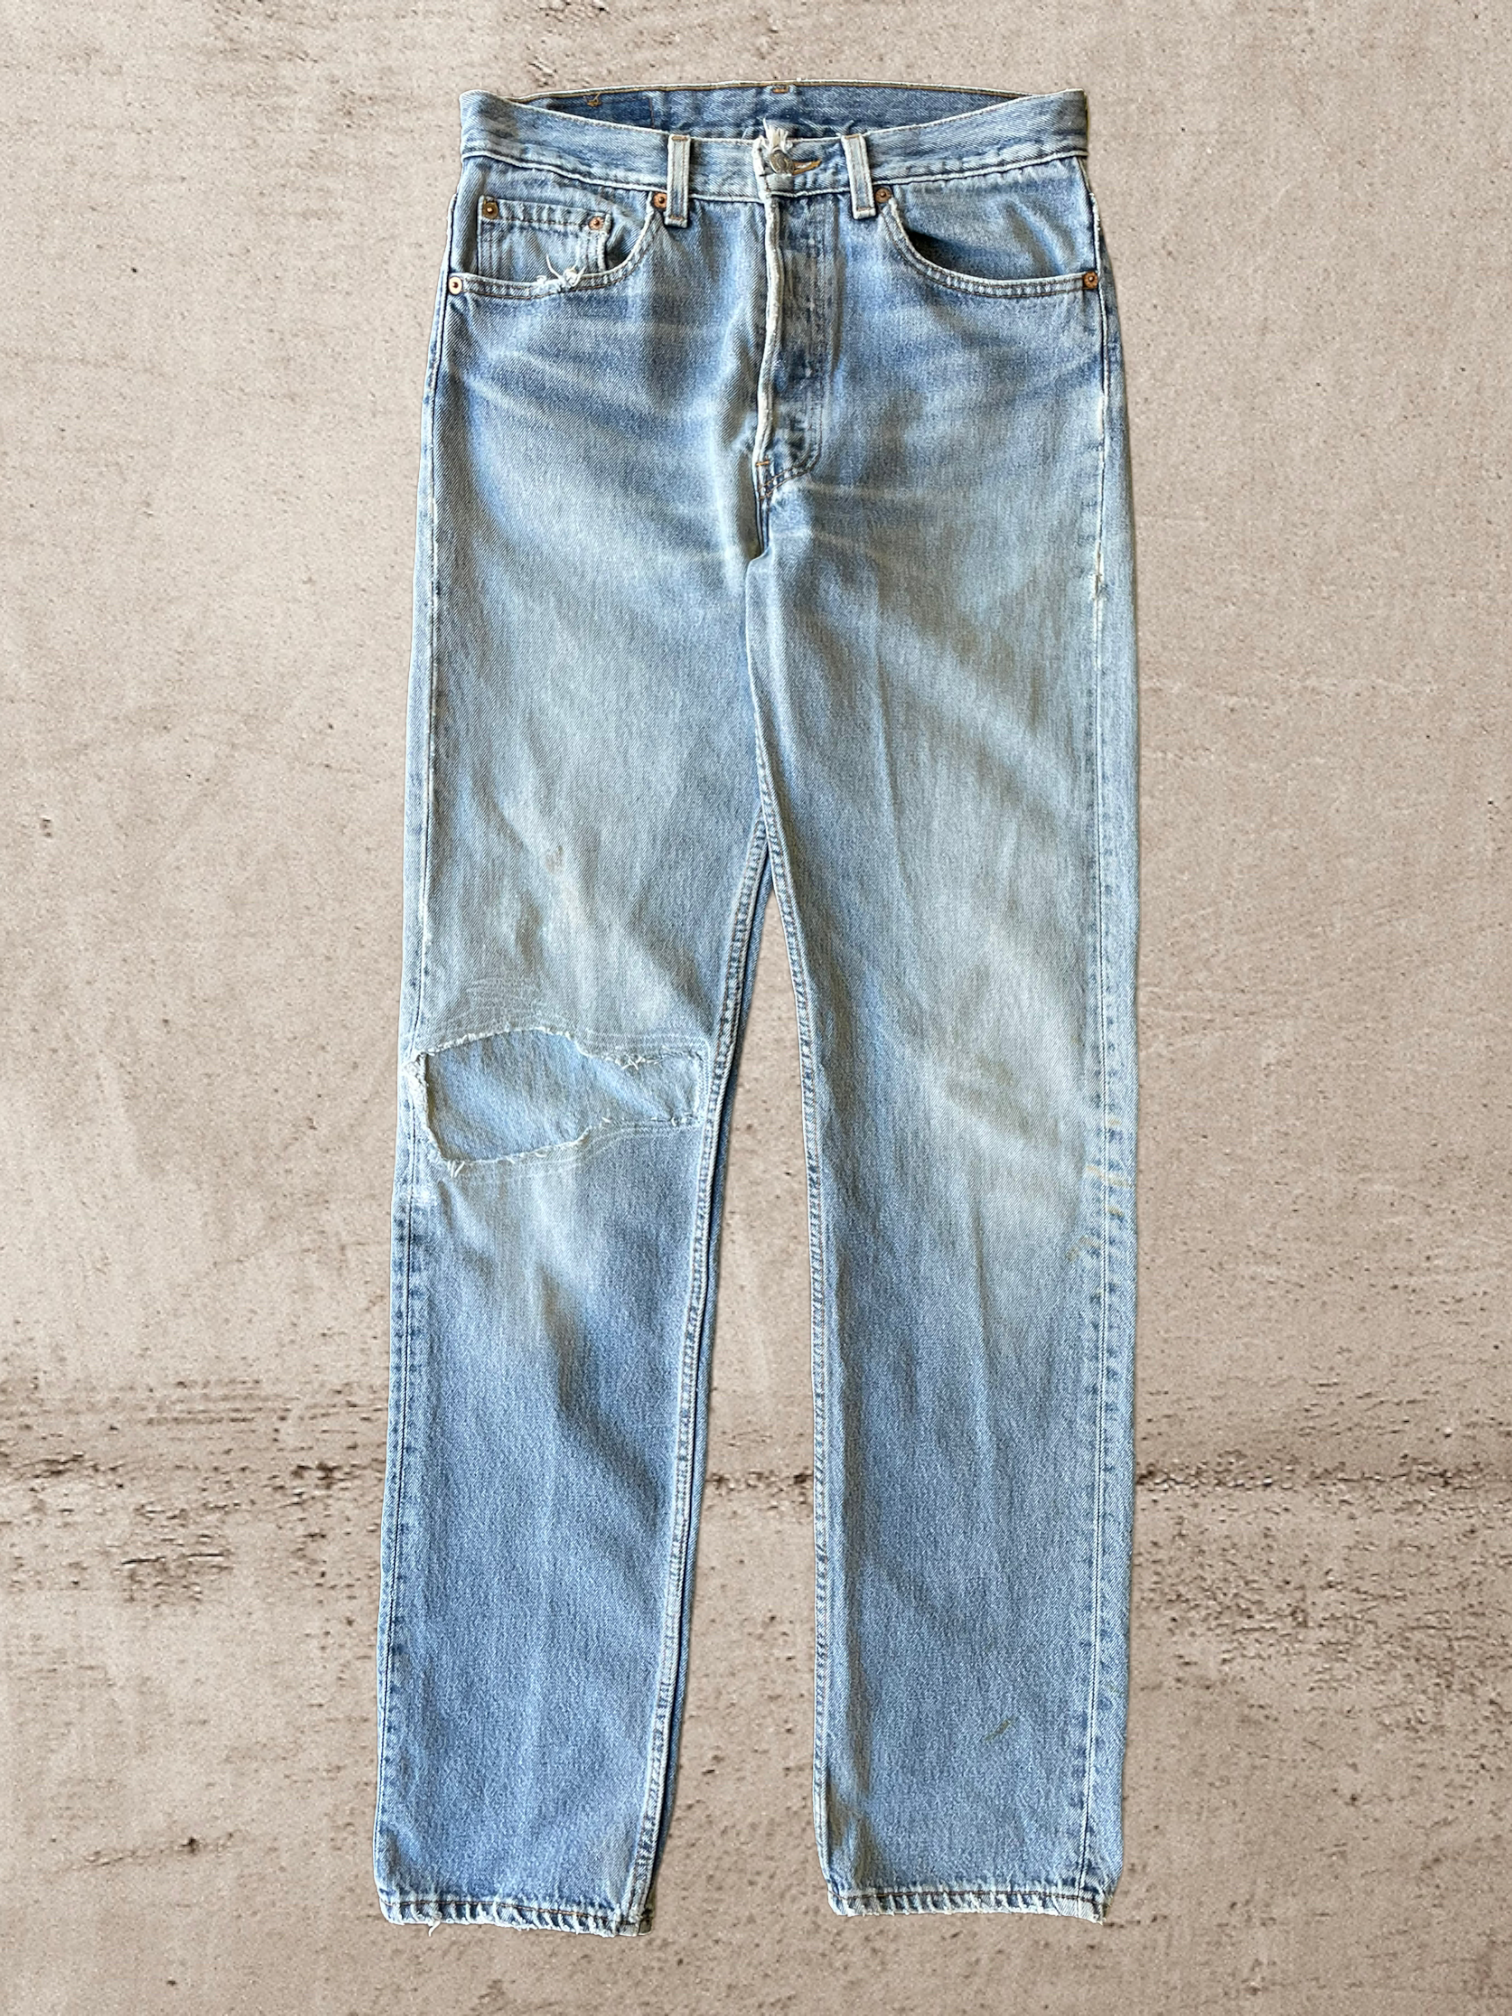 90s Levi 501 Repaired Jeans -29x33.5